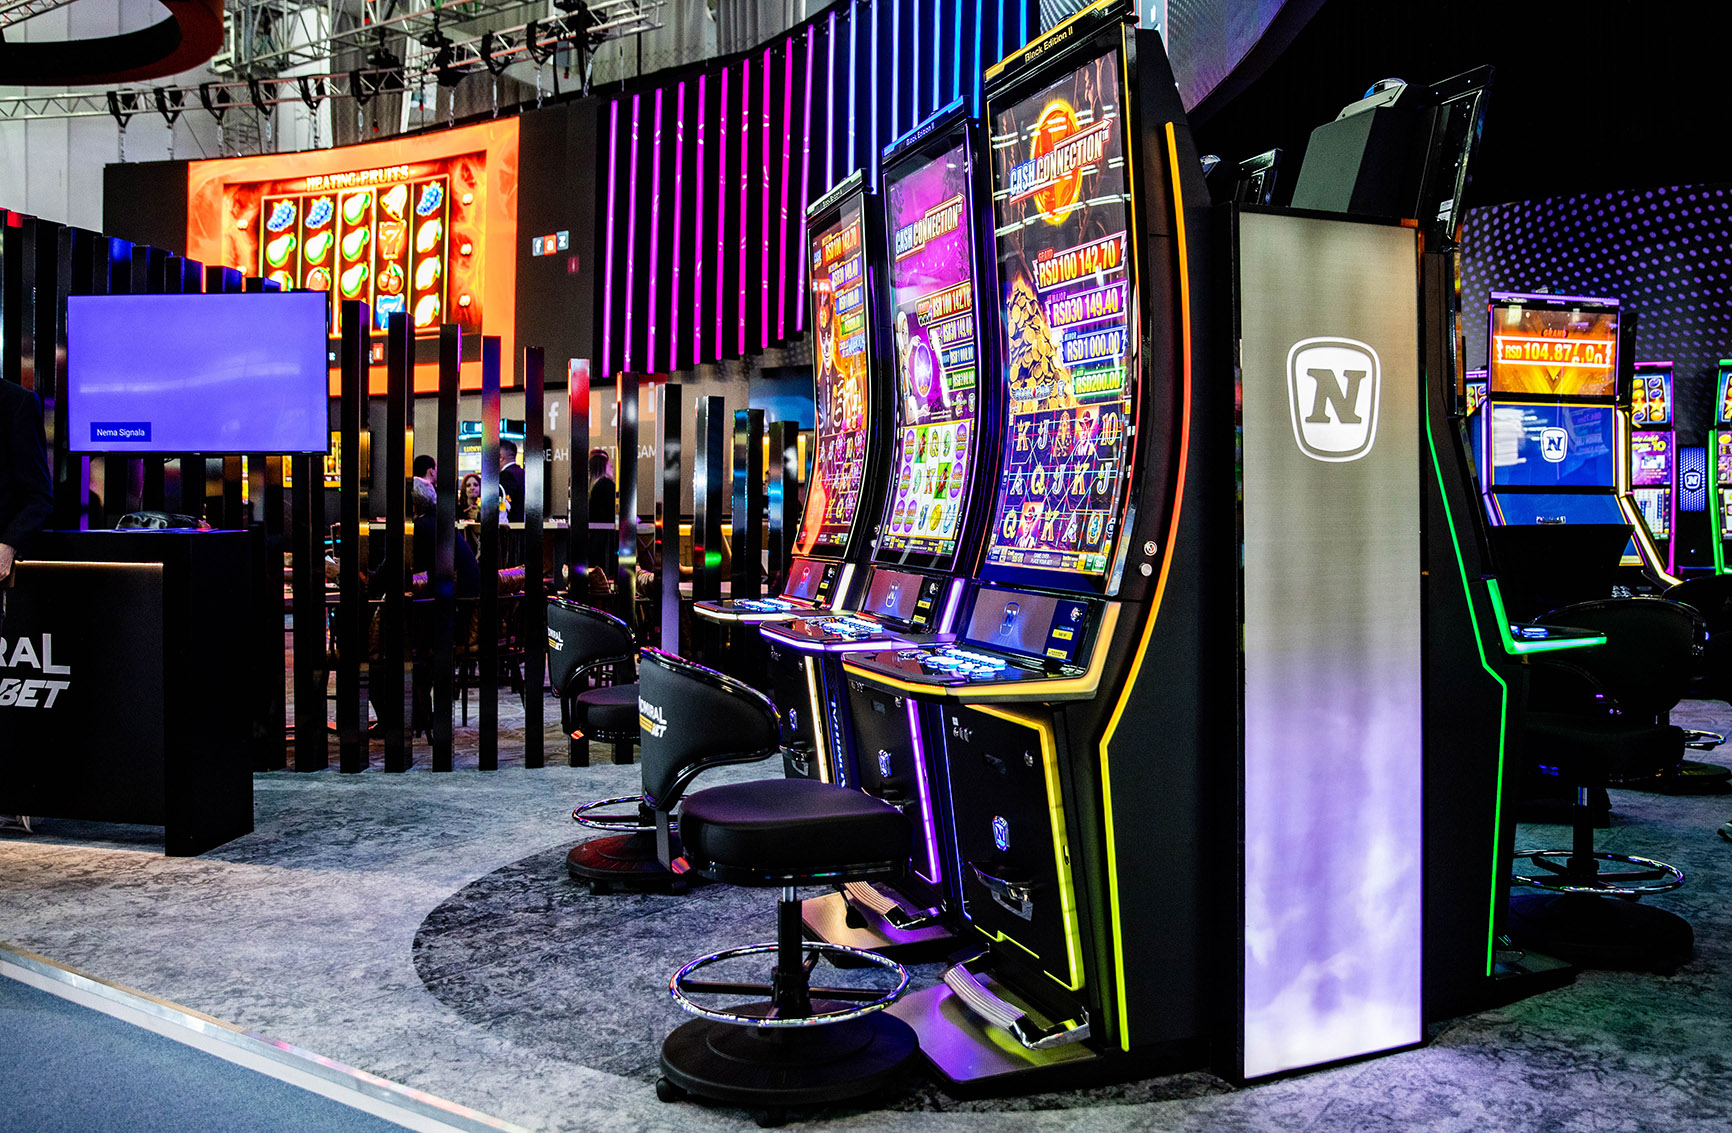 EGT set to confirm position at Belgrade Future Gaming - Casino Review